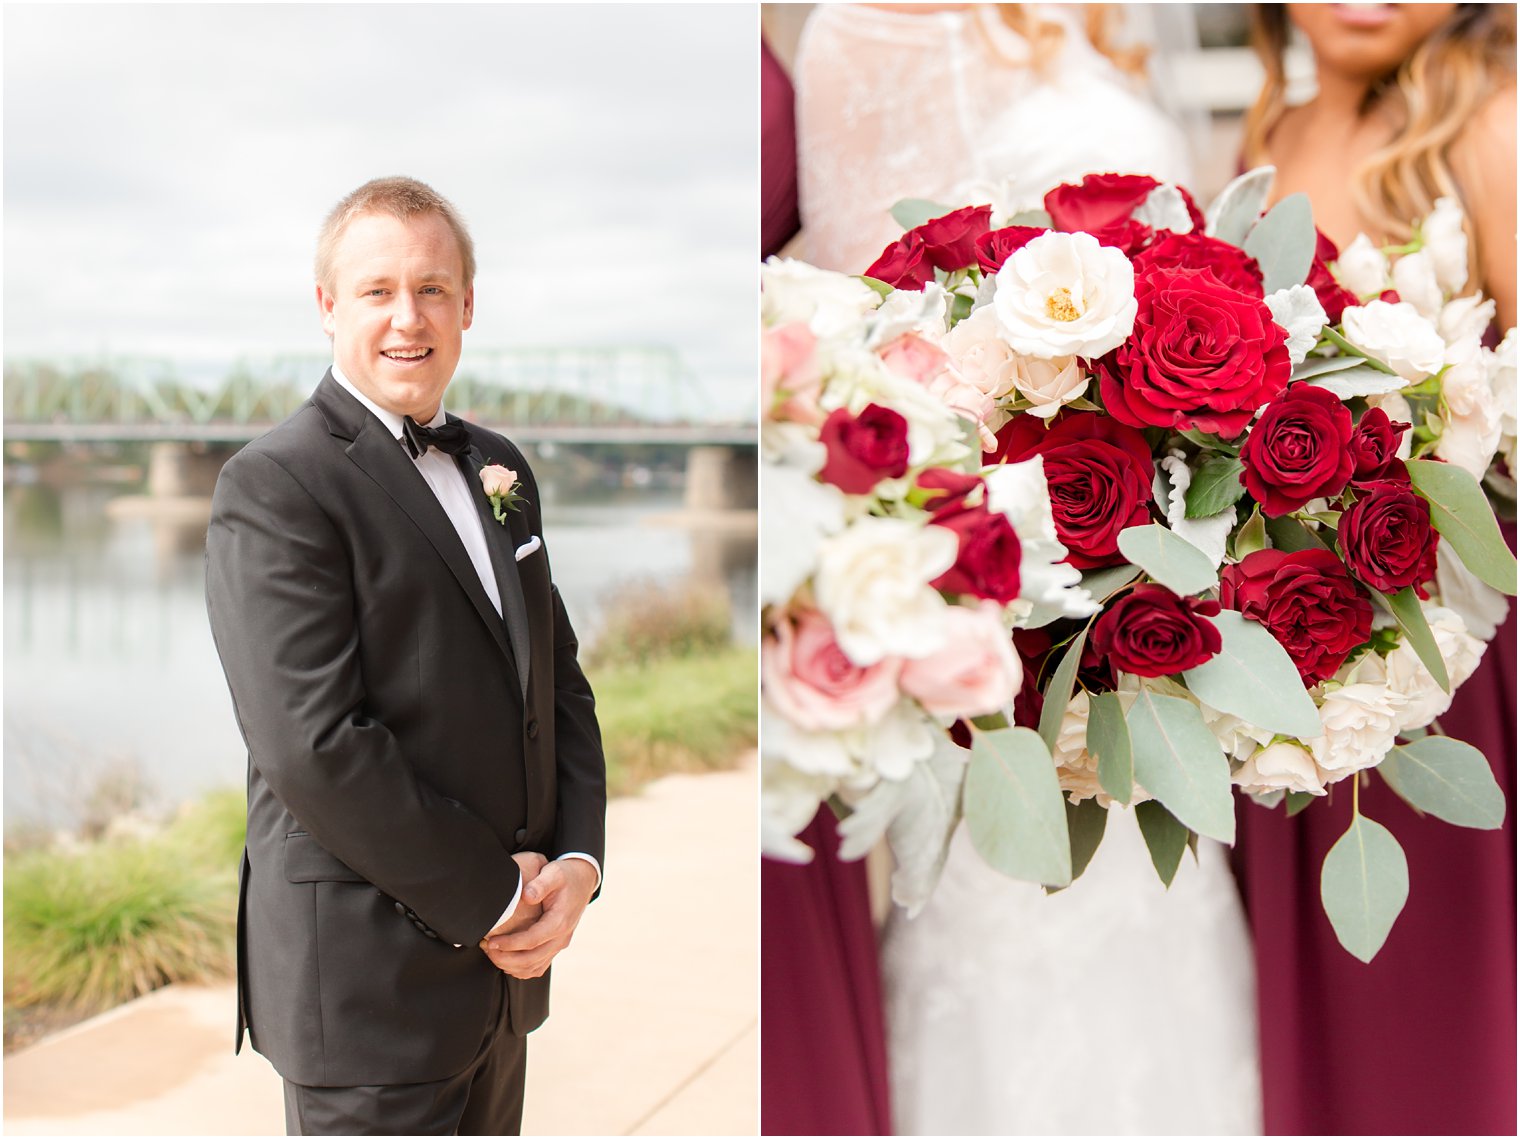 Fall wedding color palette in red and pink